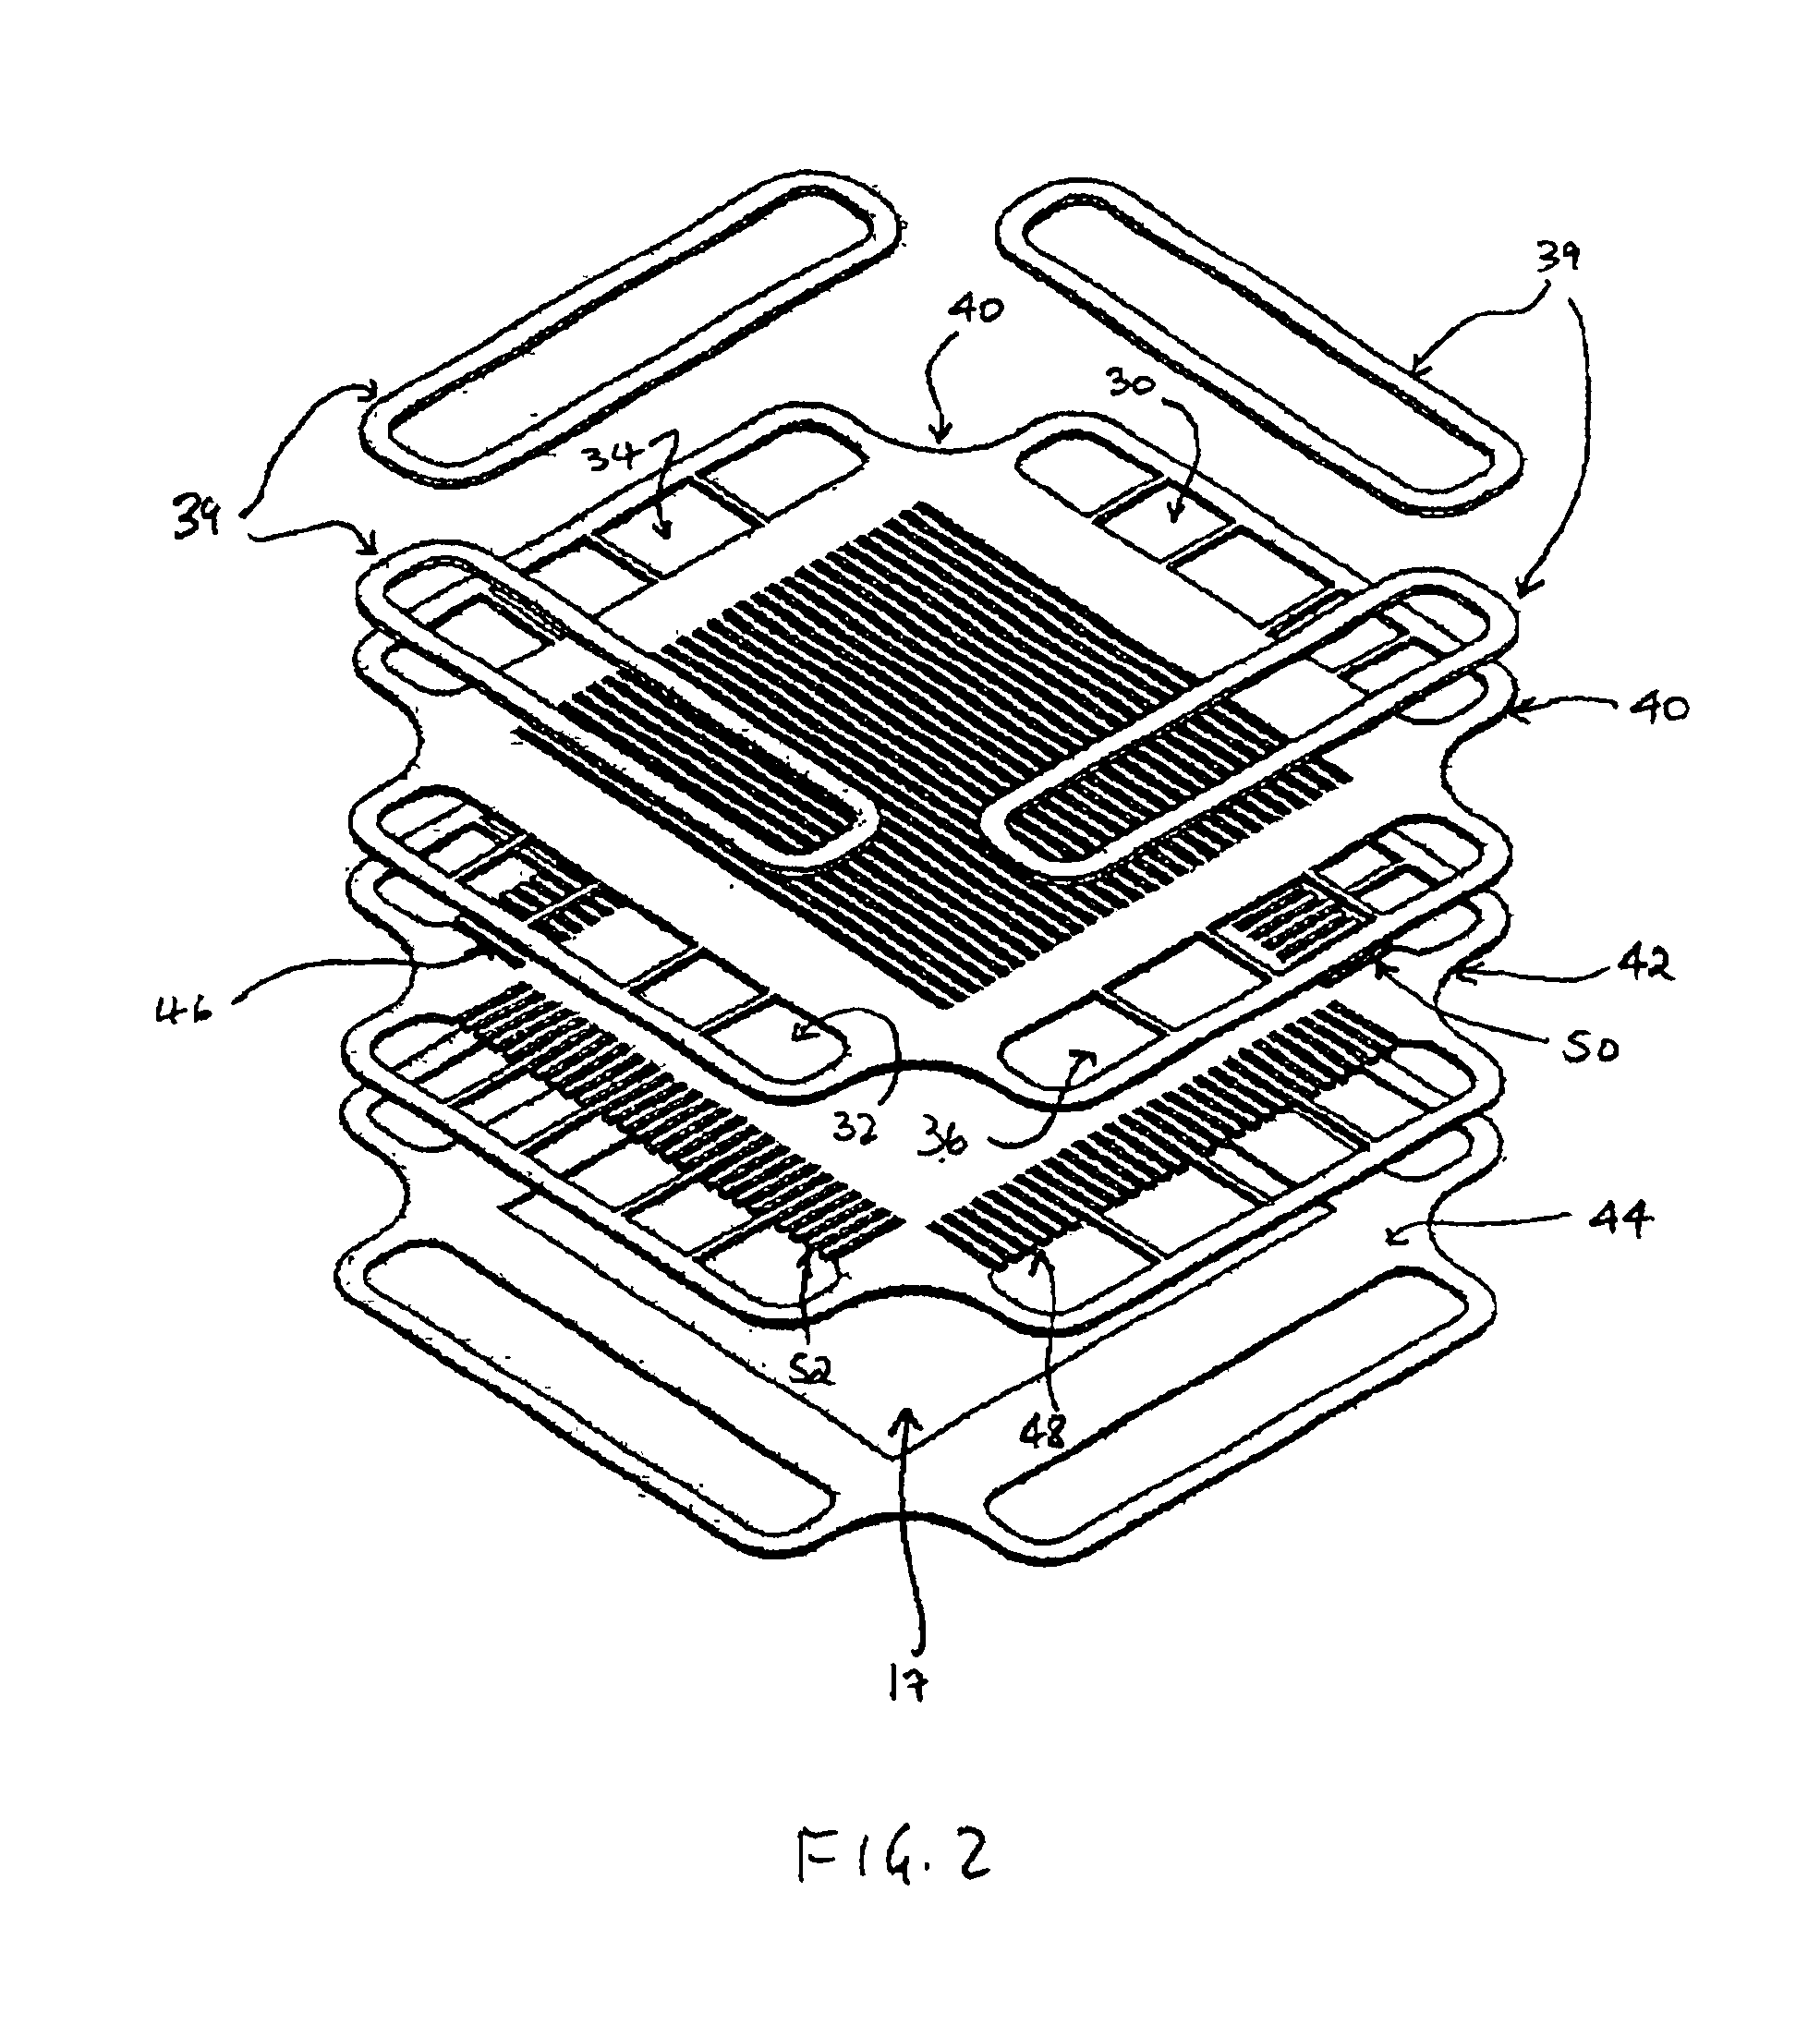 Electrochemical cell interconnect